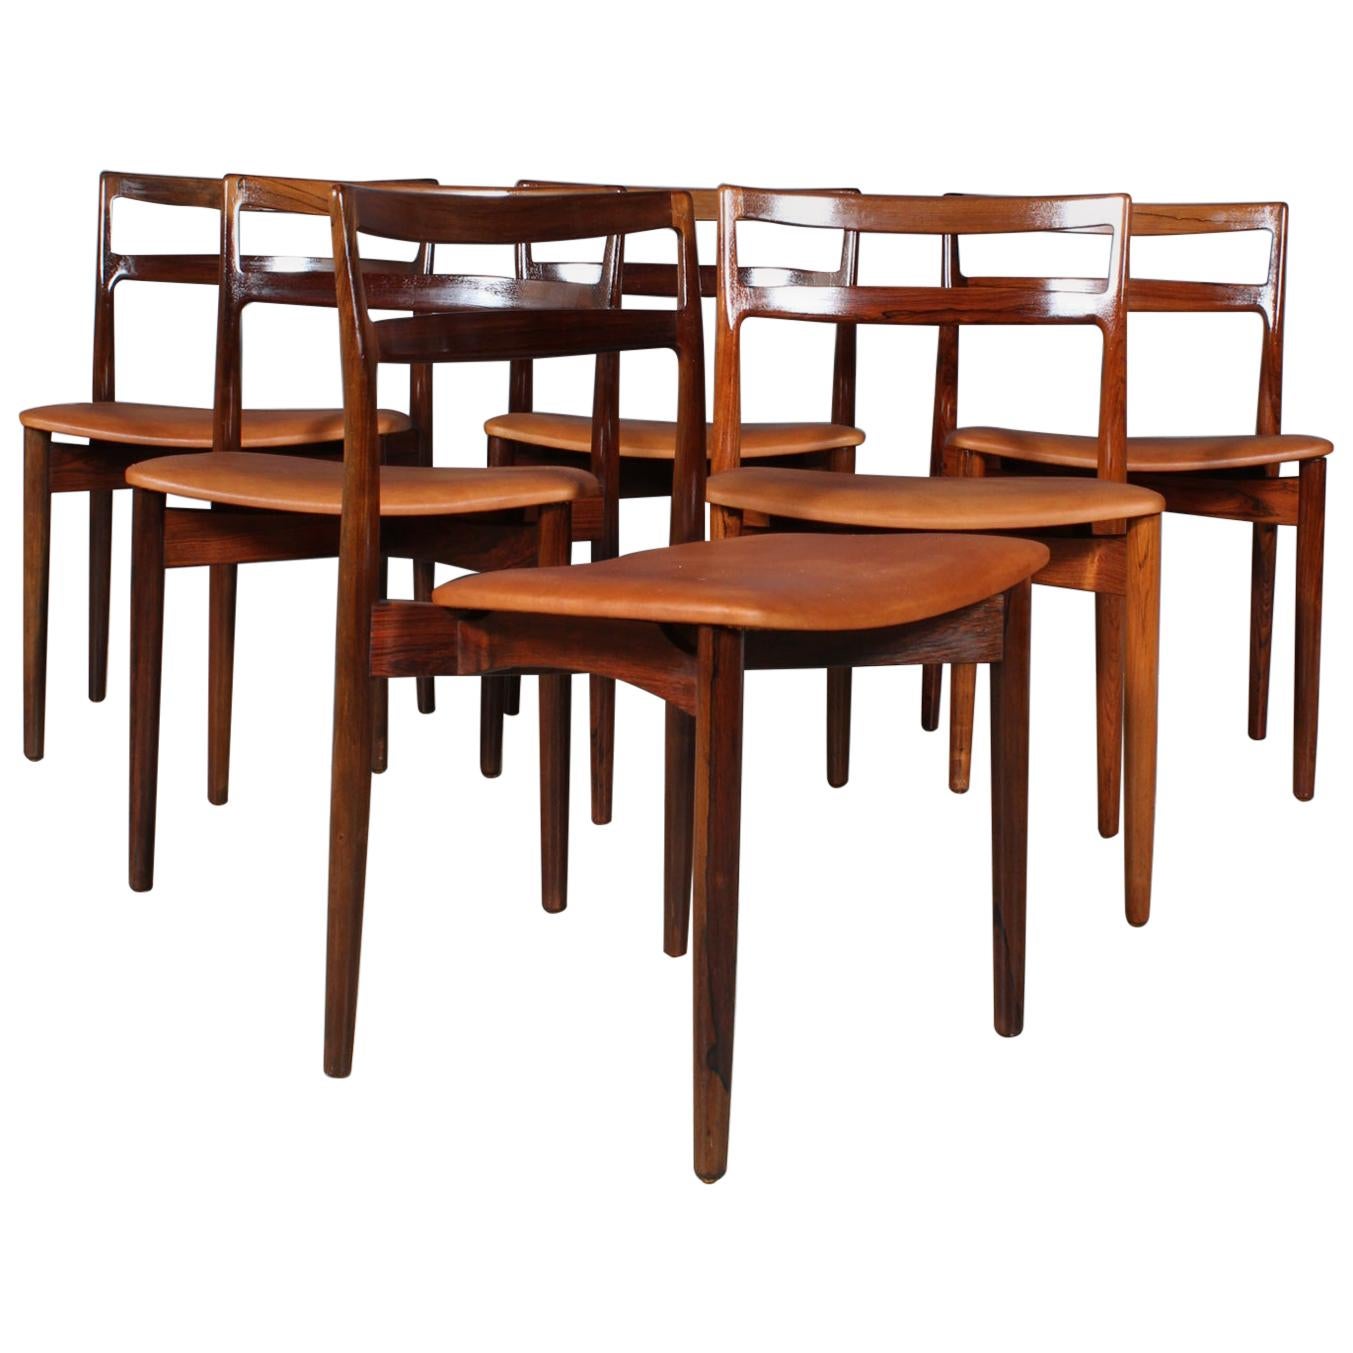 Harry Ostergaard, Set of Dining Chairs